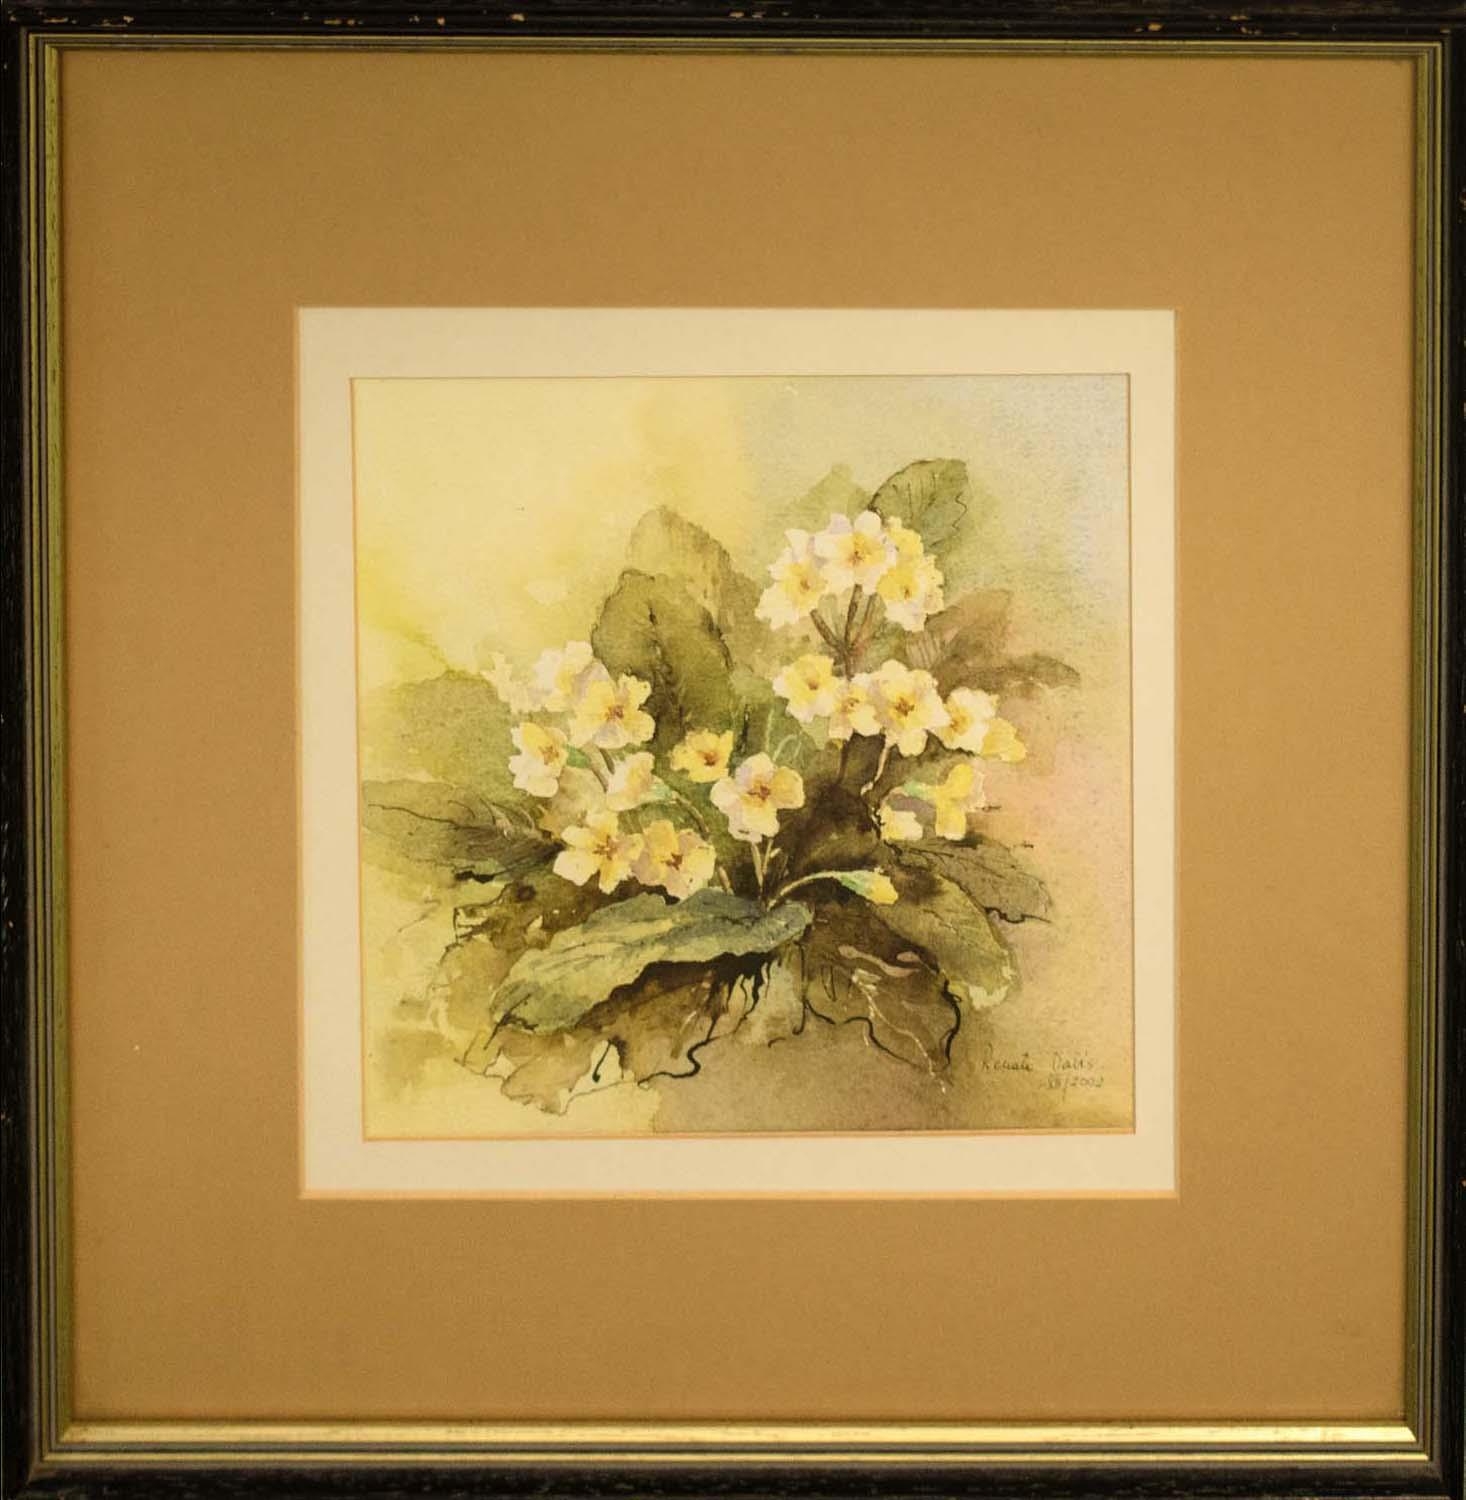 RENATE DAVIS 'Primroses', 2002, watercolour, signed and dated lower right, 21cm x 21cm, framed and - Image 2 of 6